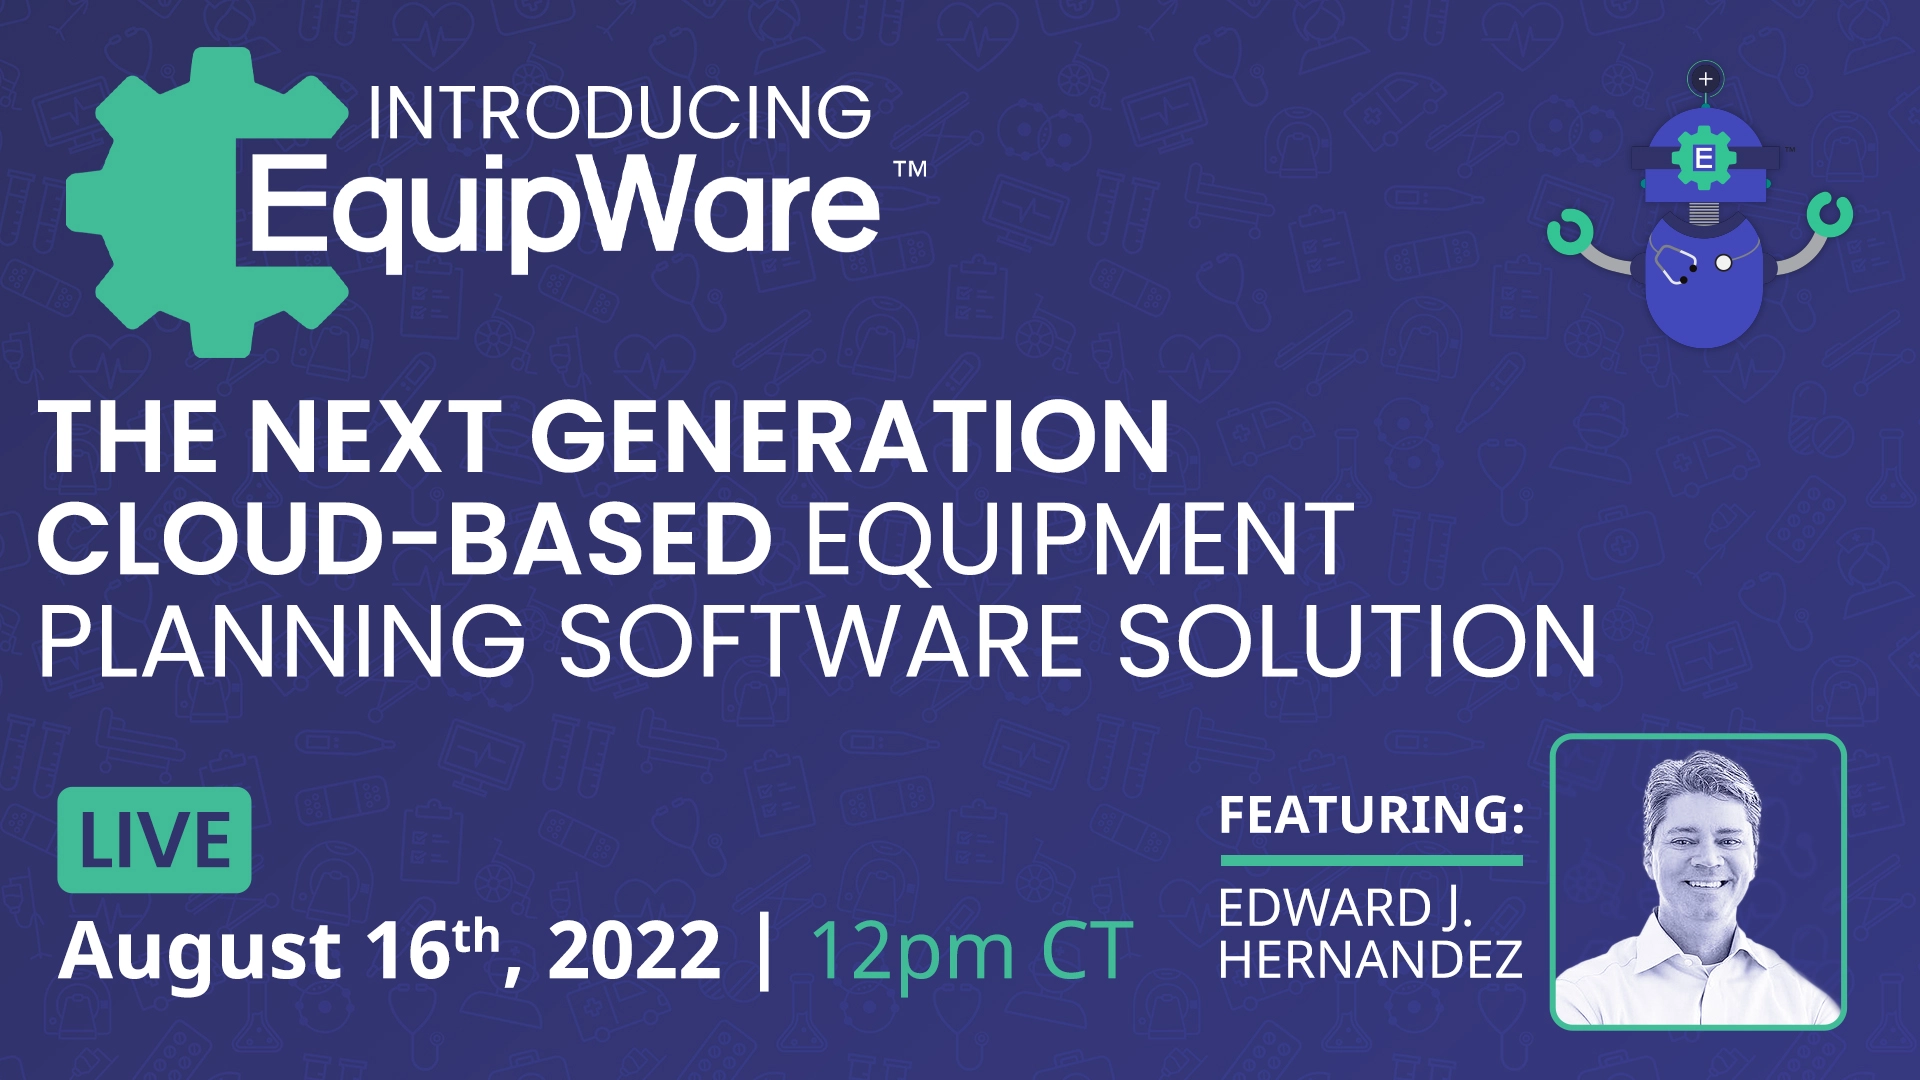 Introducing EquipWare: The Next Generation Cloud-Based Equipment Planning Software Solution